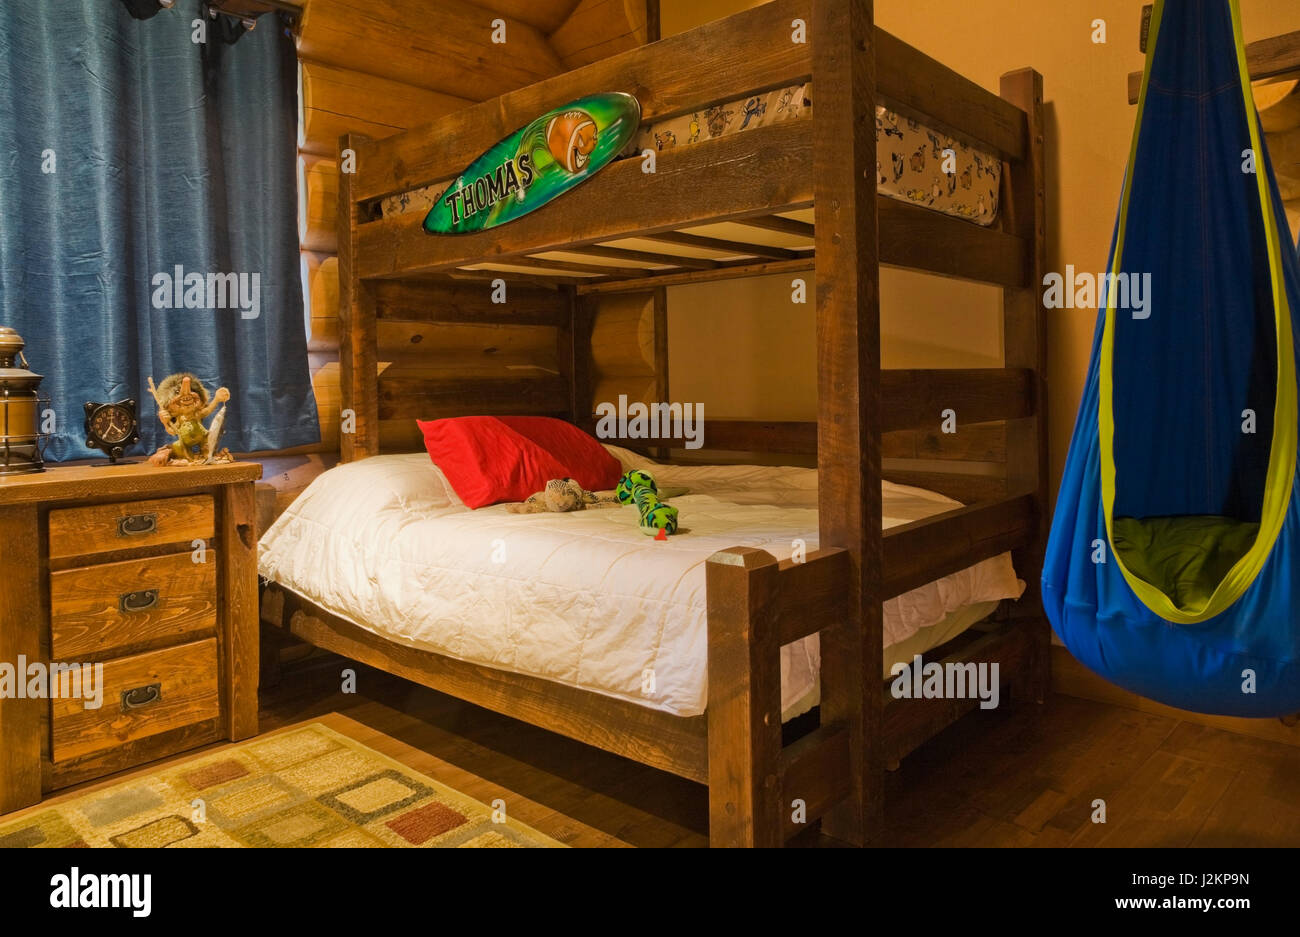 Old Wooden Bunk Bed And Blue And Green Hammock Chair In Boys